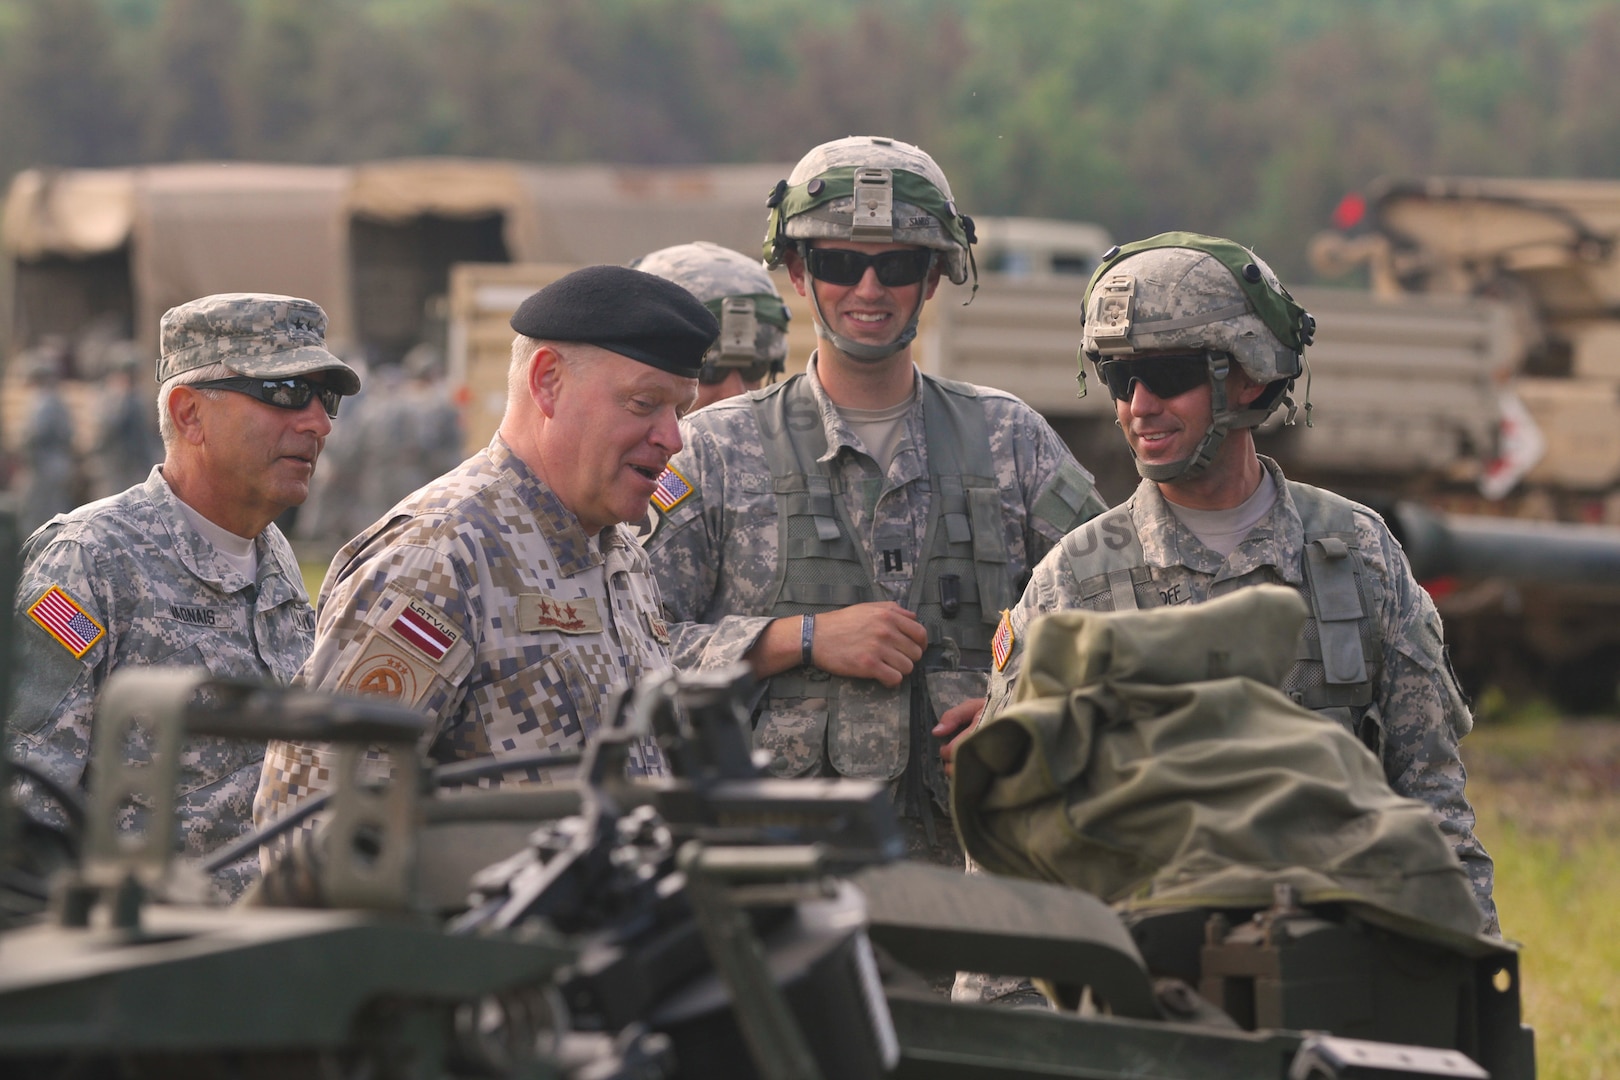 Maj. Gen. Gregory J. Vadnais, adjutant general and director of Military and Veterans Affairs for the Michigan National Guard, and Lt. Gen. Raimonds Graube, Latvian Chief of Defense, discuss the capabilities of the M777A1 howitzer with a gun crew of Alpha Battery, 1st Battalion, 119th Field Artillery Regiment, during the Exportable Combat Training Capability exercise at Camp Grayling Joint Maneuver Training Center, Mich., July 14, 2014. 